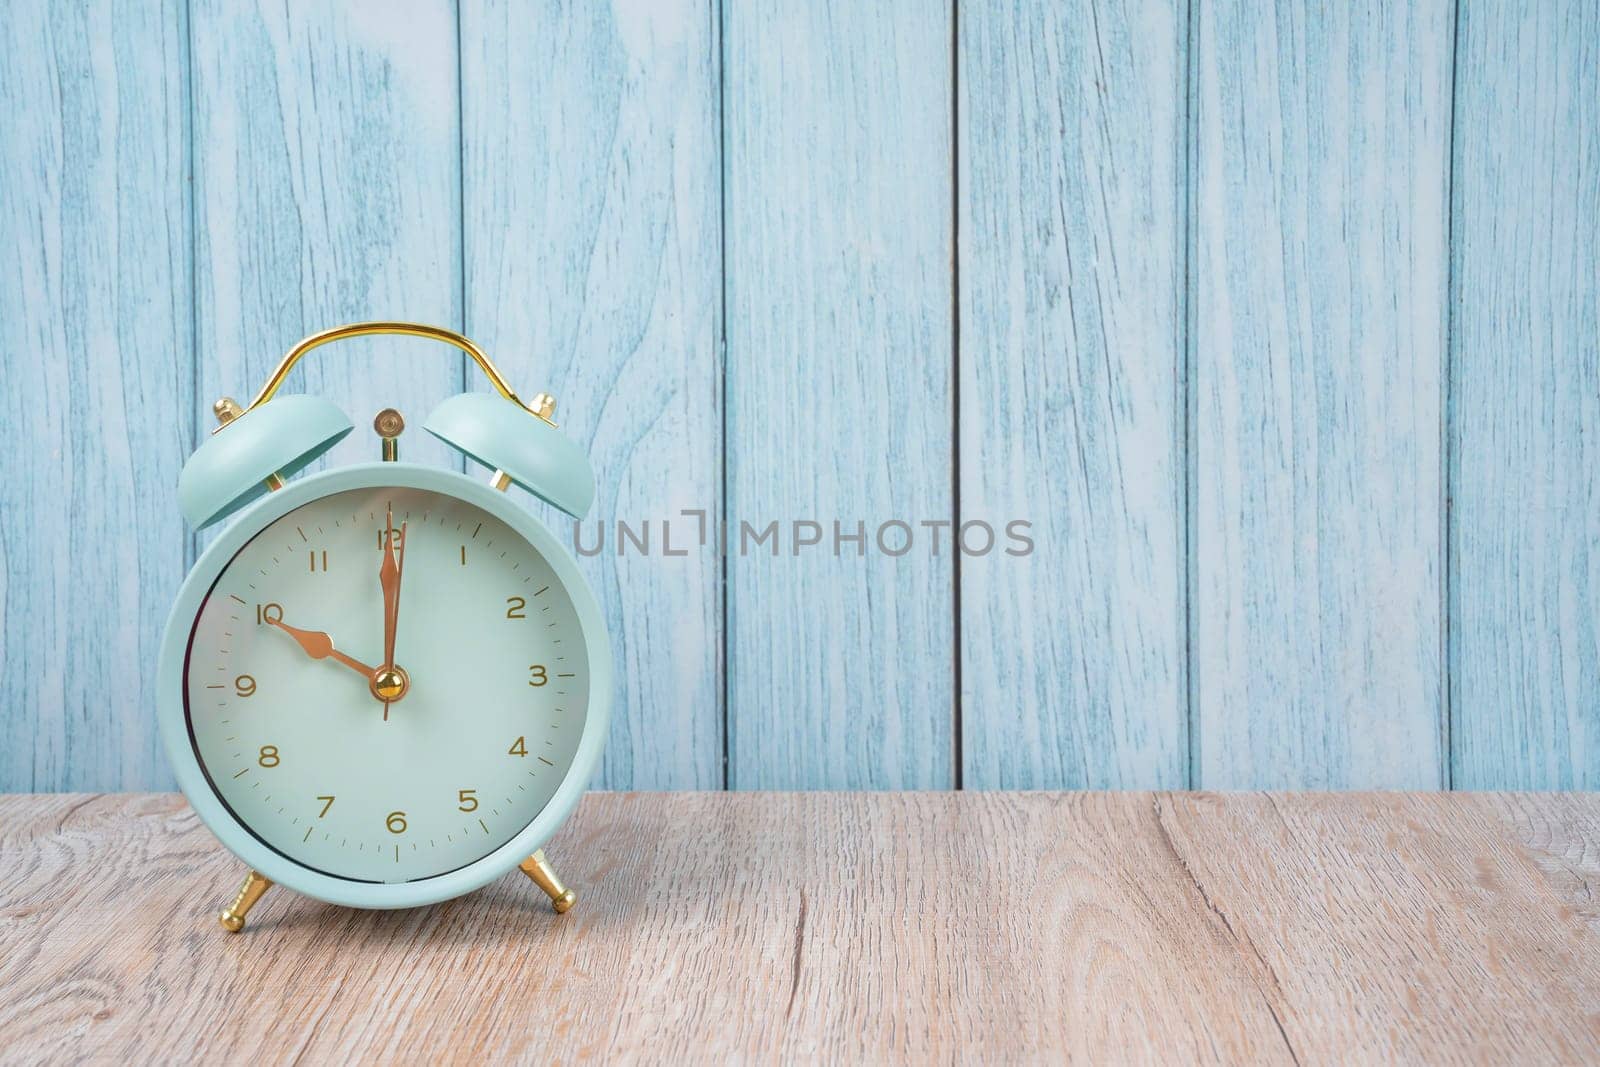 The vintage retro alarm clock ten time 10 o'clock on table wood with dark background. by Gamjai